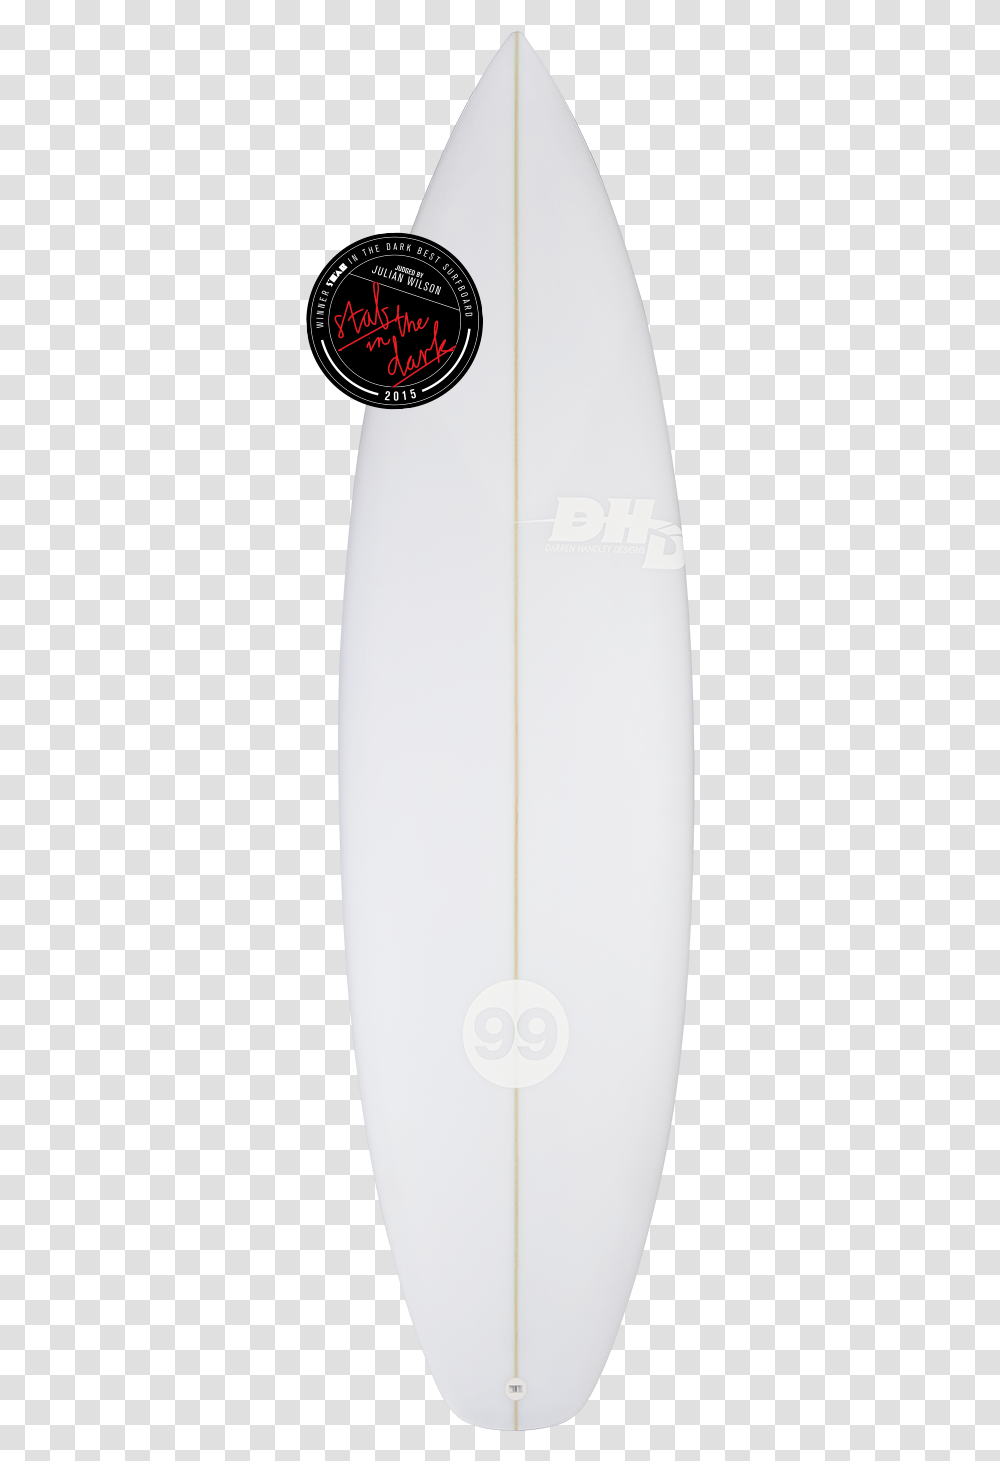 Stab In The Dark Skateboard Deck, Sea, Outdoors, Water, Nature Transparent Png